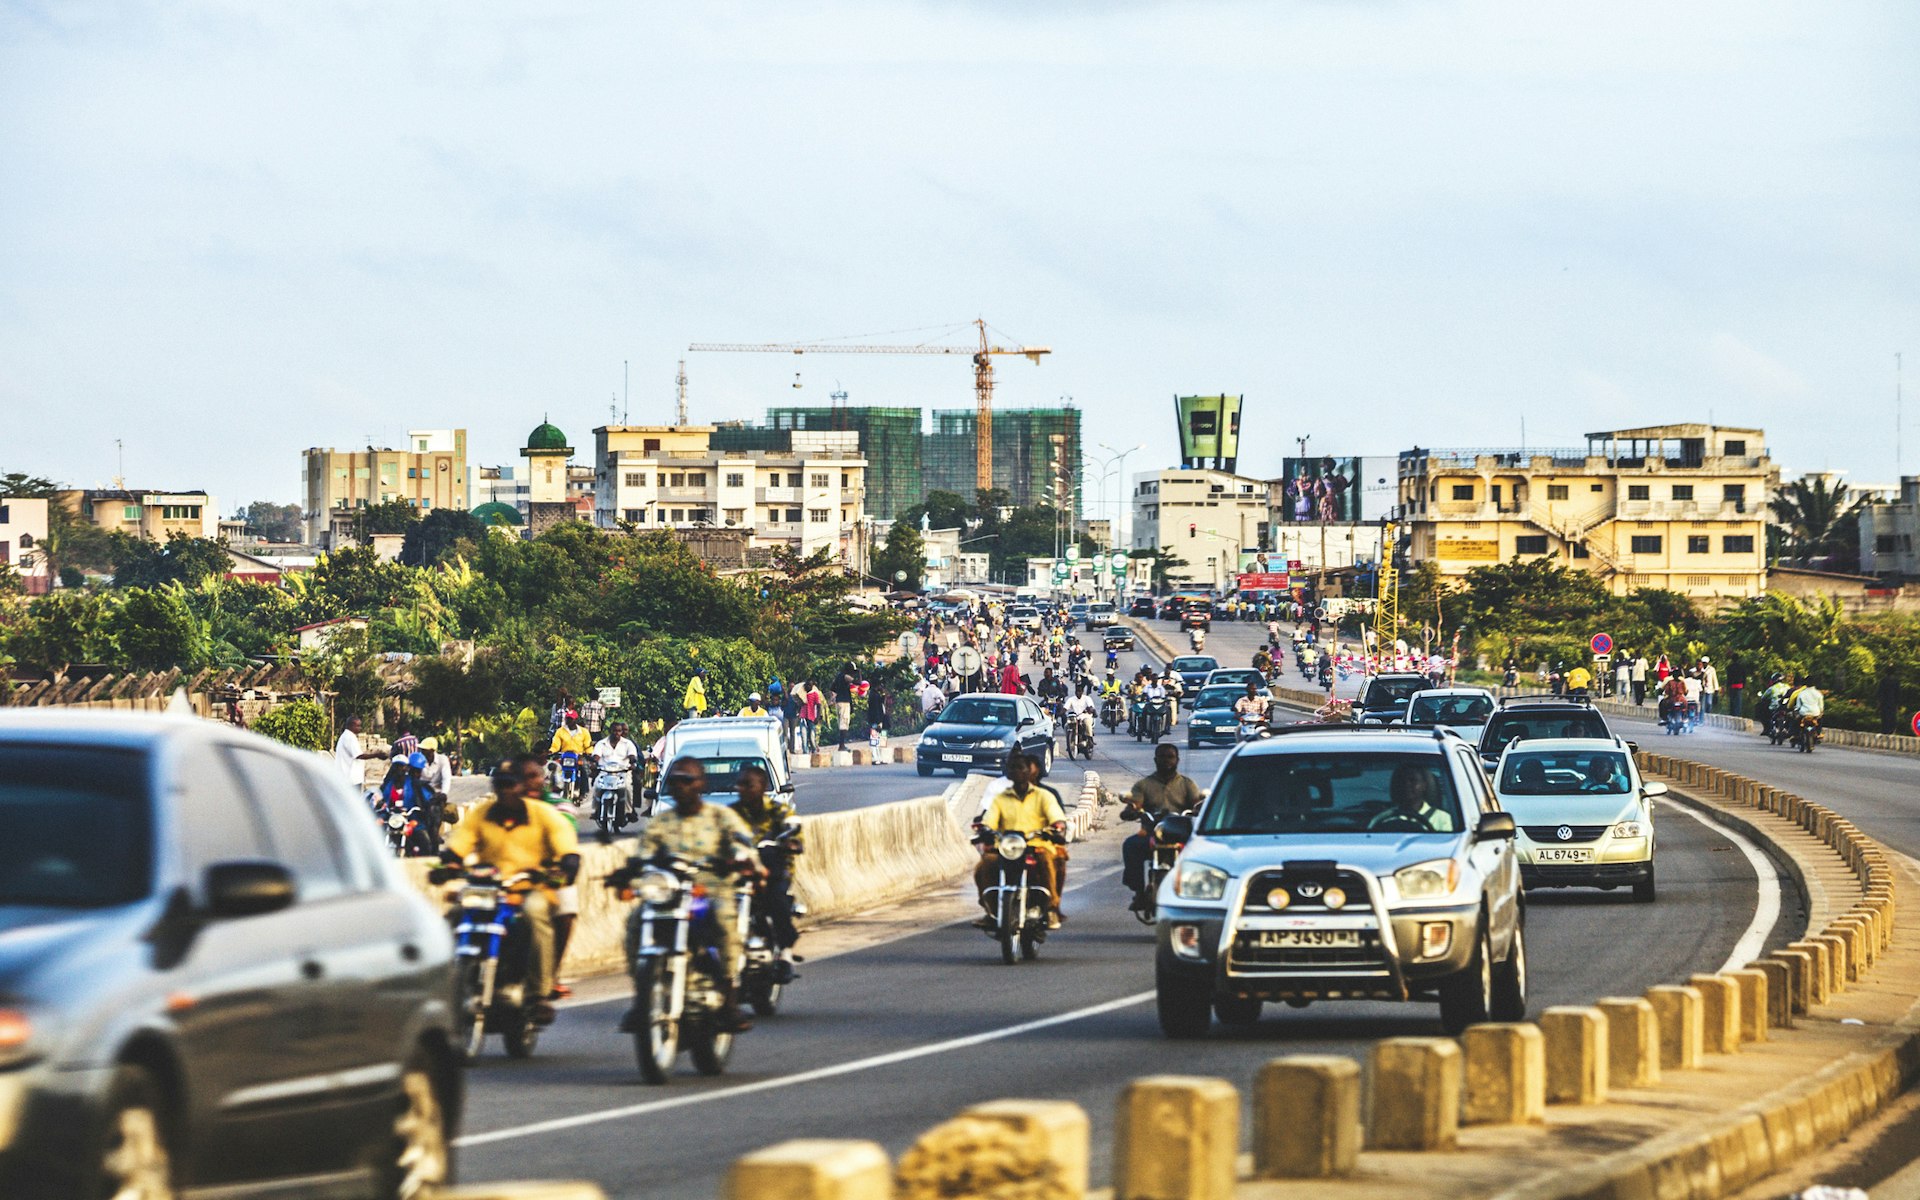 City traffic just before sunset in Cotonou